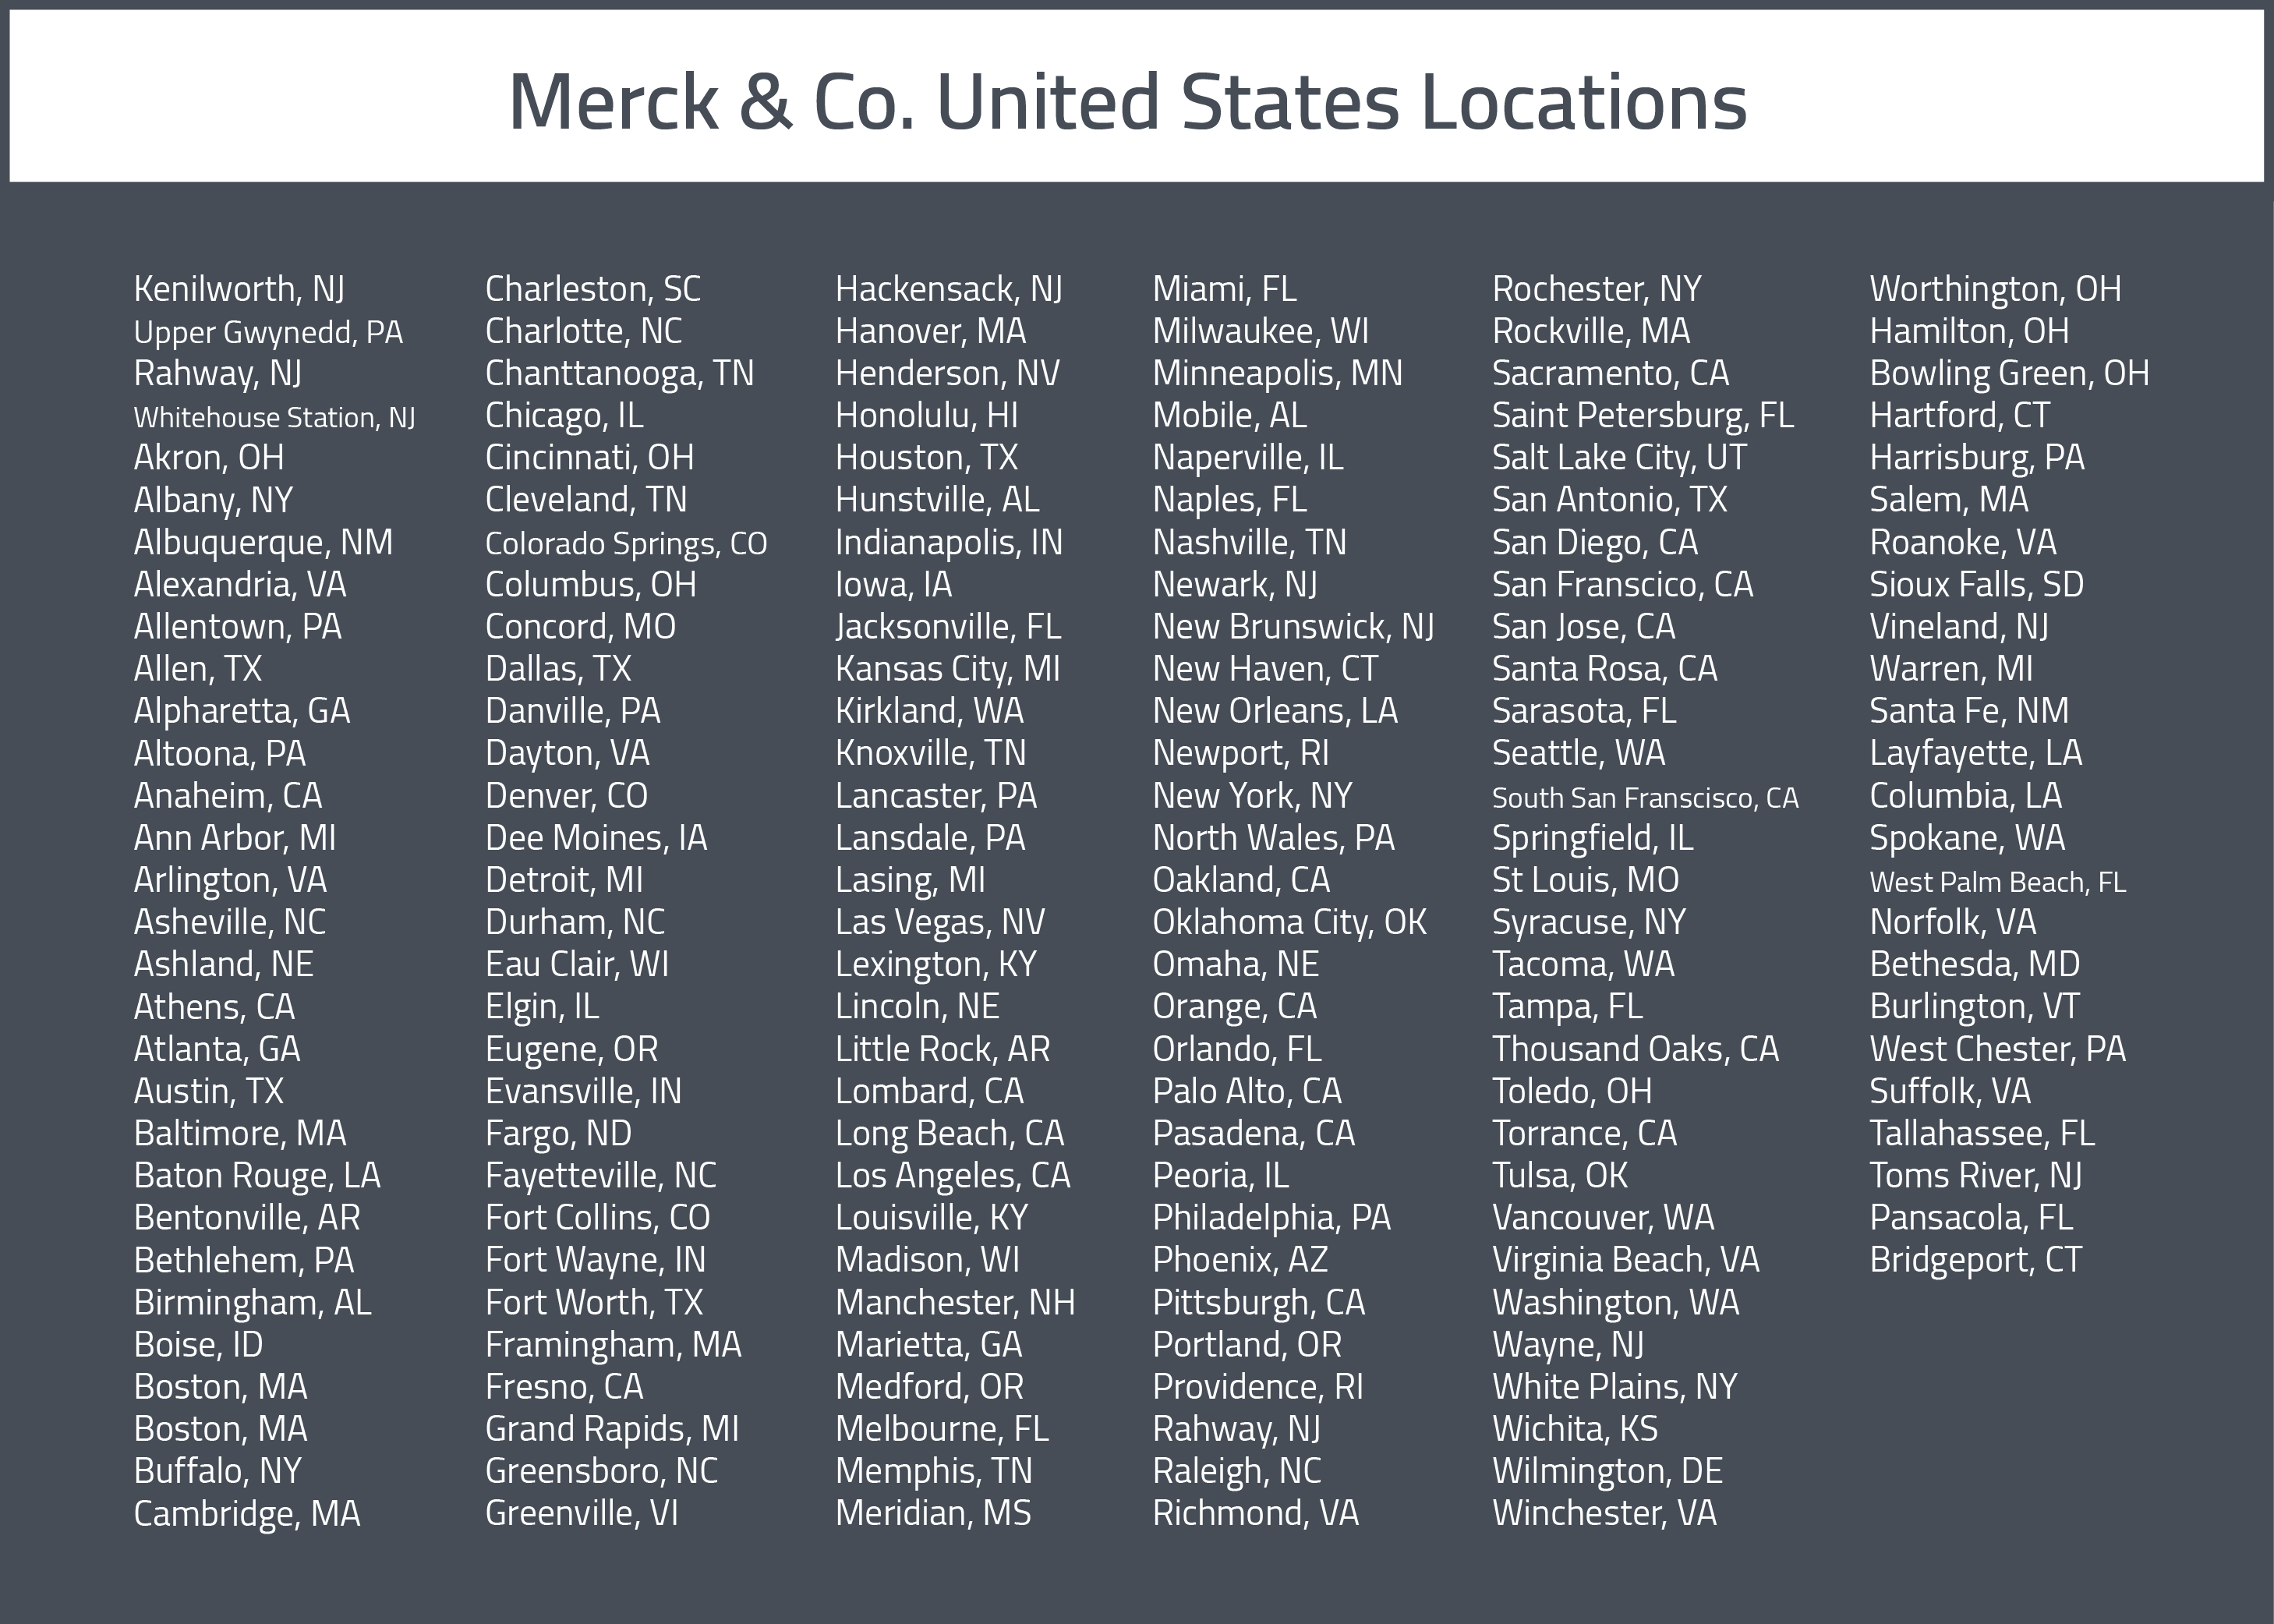 A map of Merck & Co's Global Drug Development and Manufacturing locations